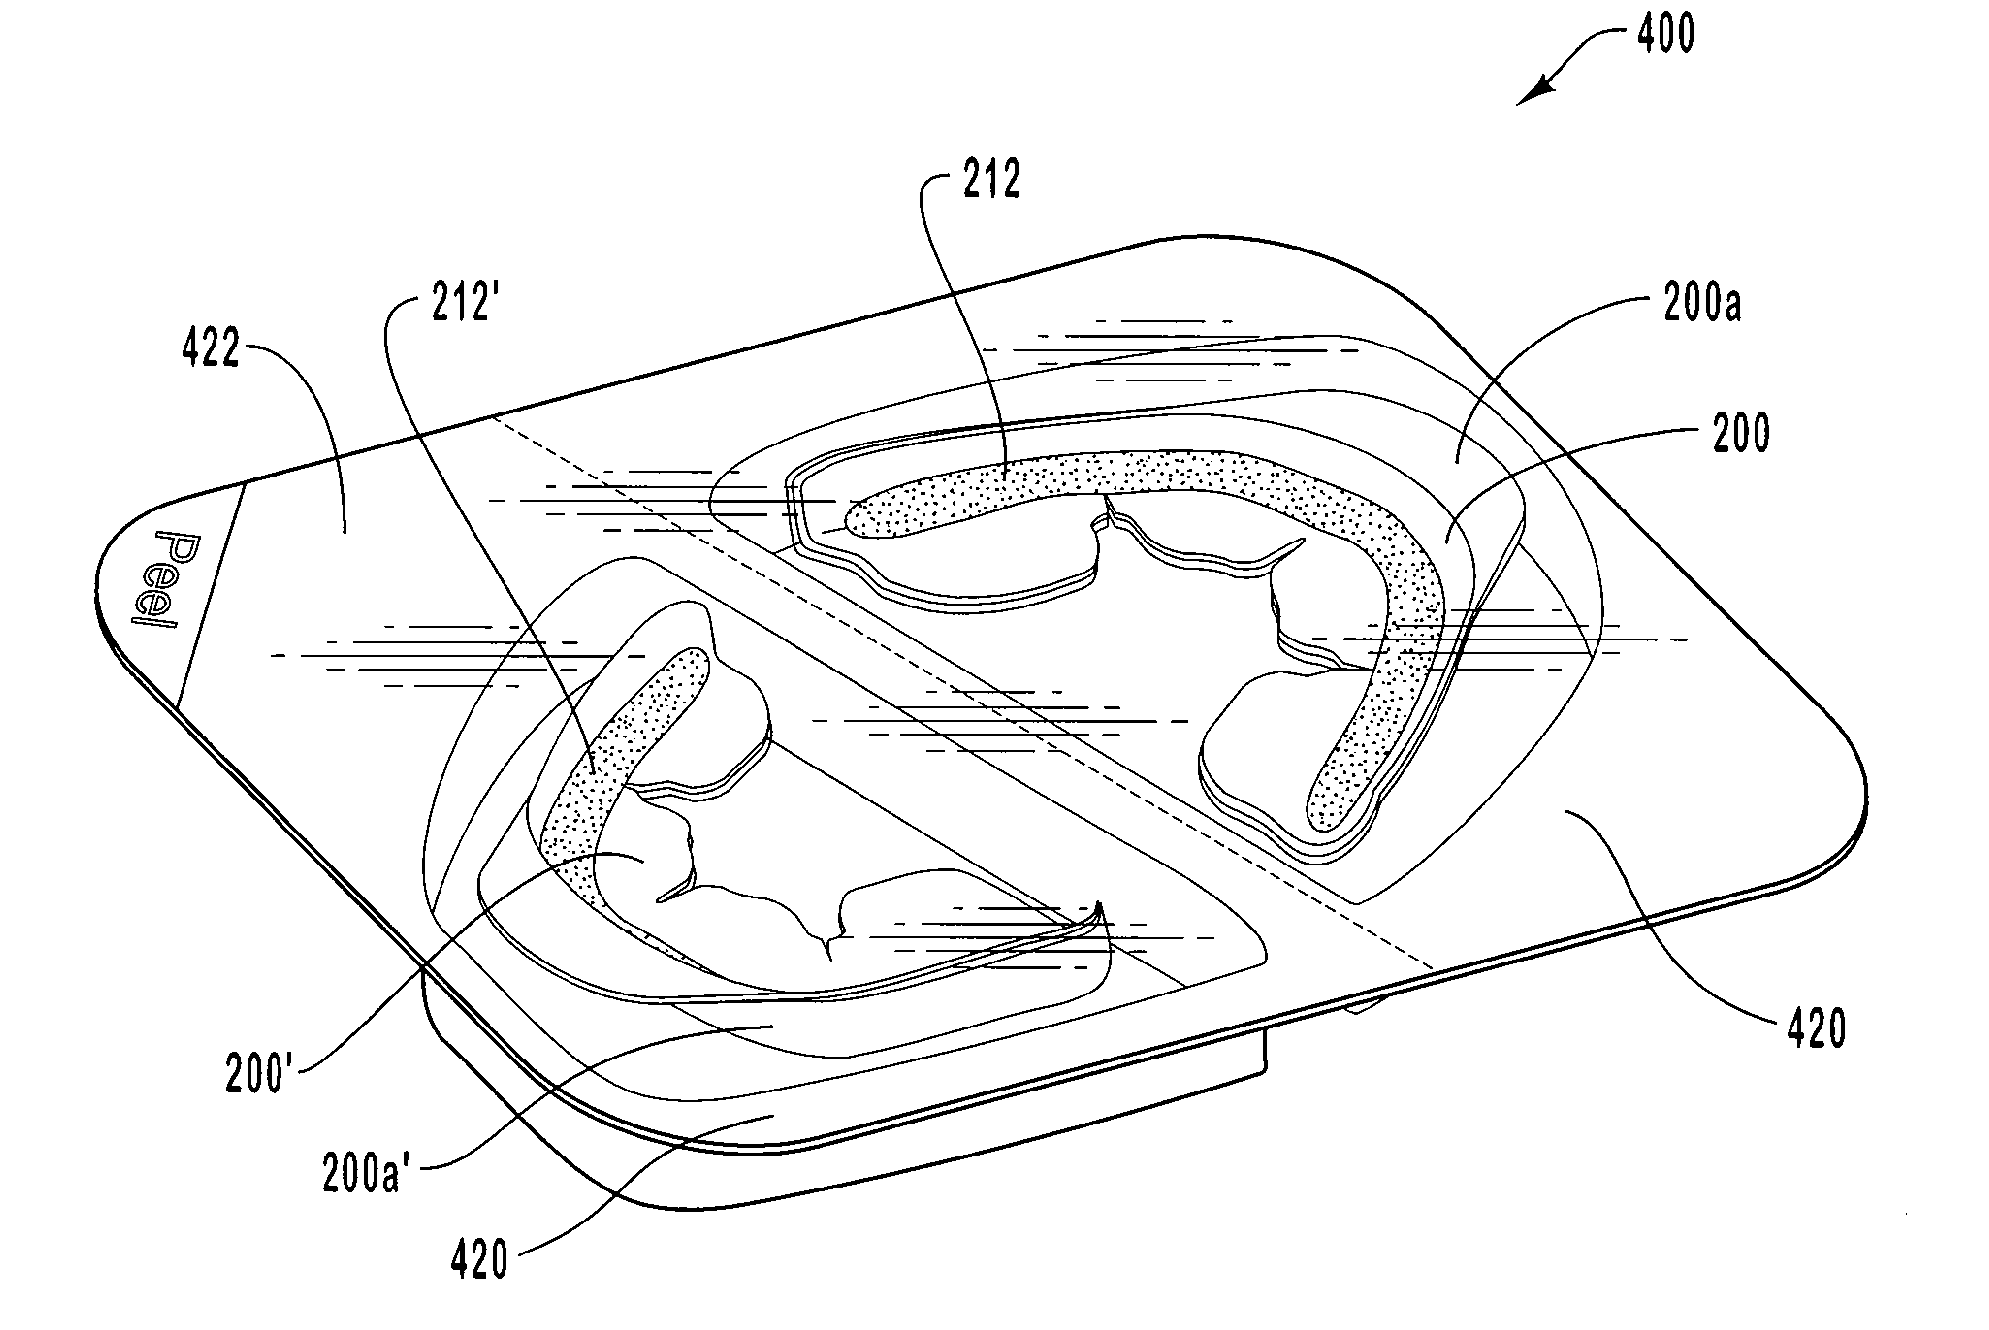 Dental bleaching compositions having long-term rheological stability and devices, kits and methods that utilize such compositions